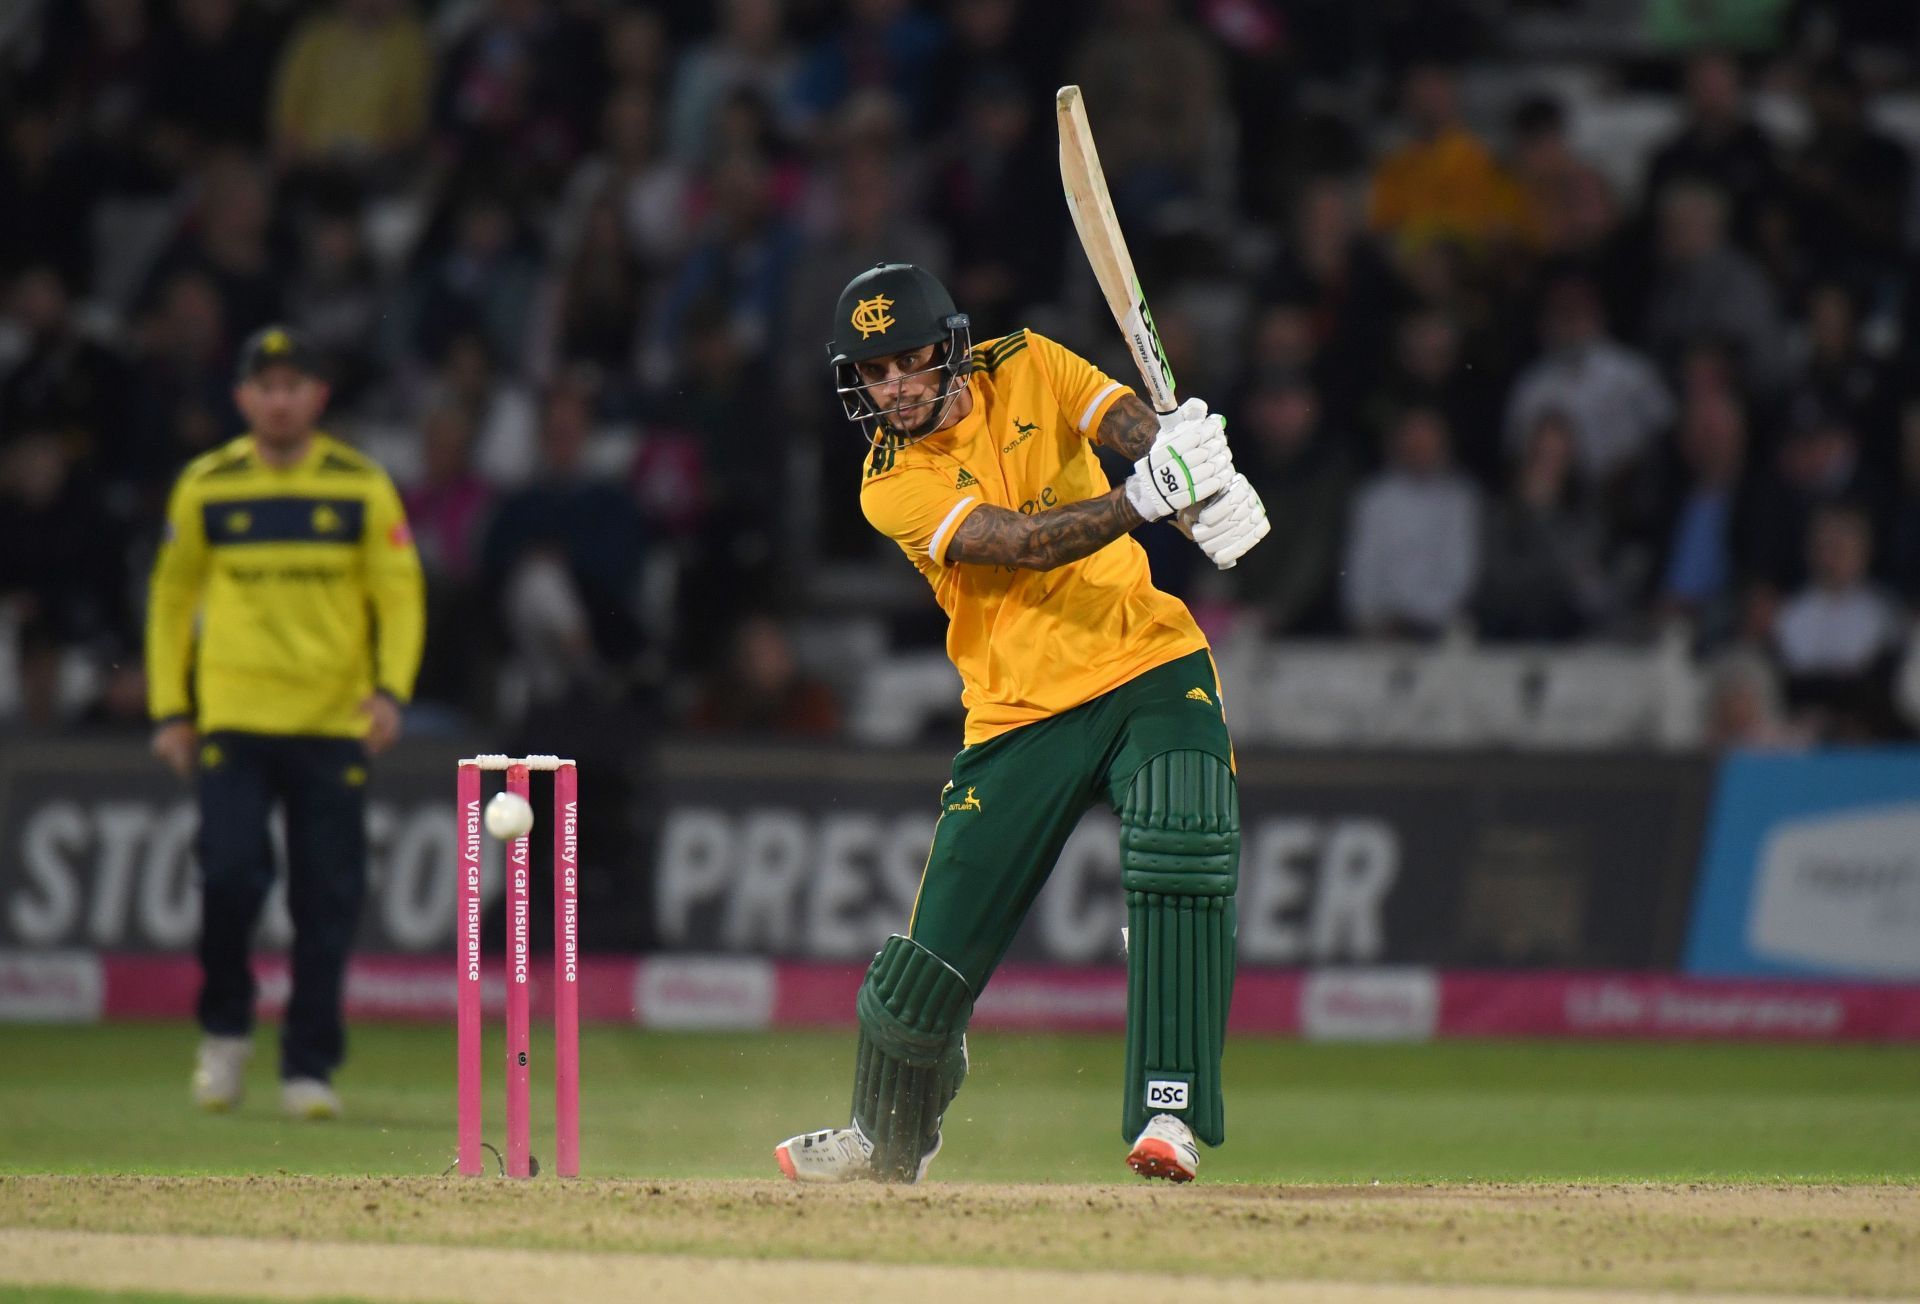 Alex Hales bats during the Vitality T20 Blast. Pic: Getty Images